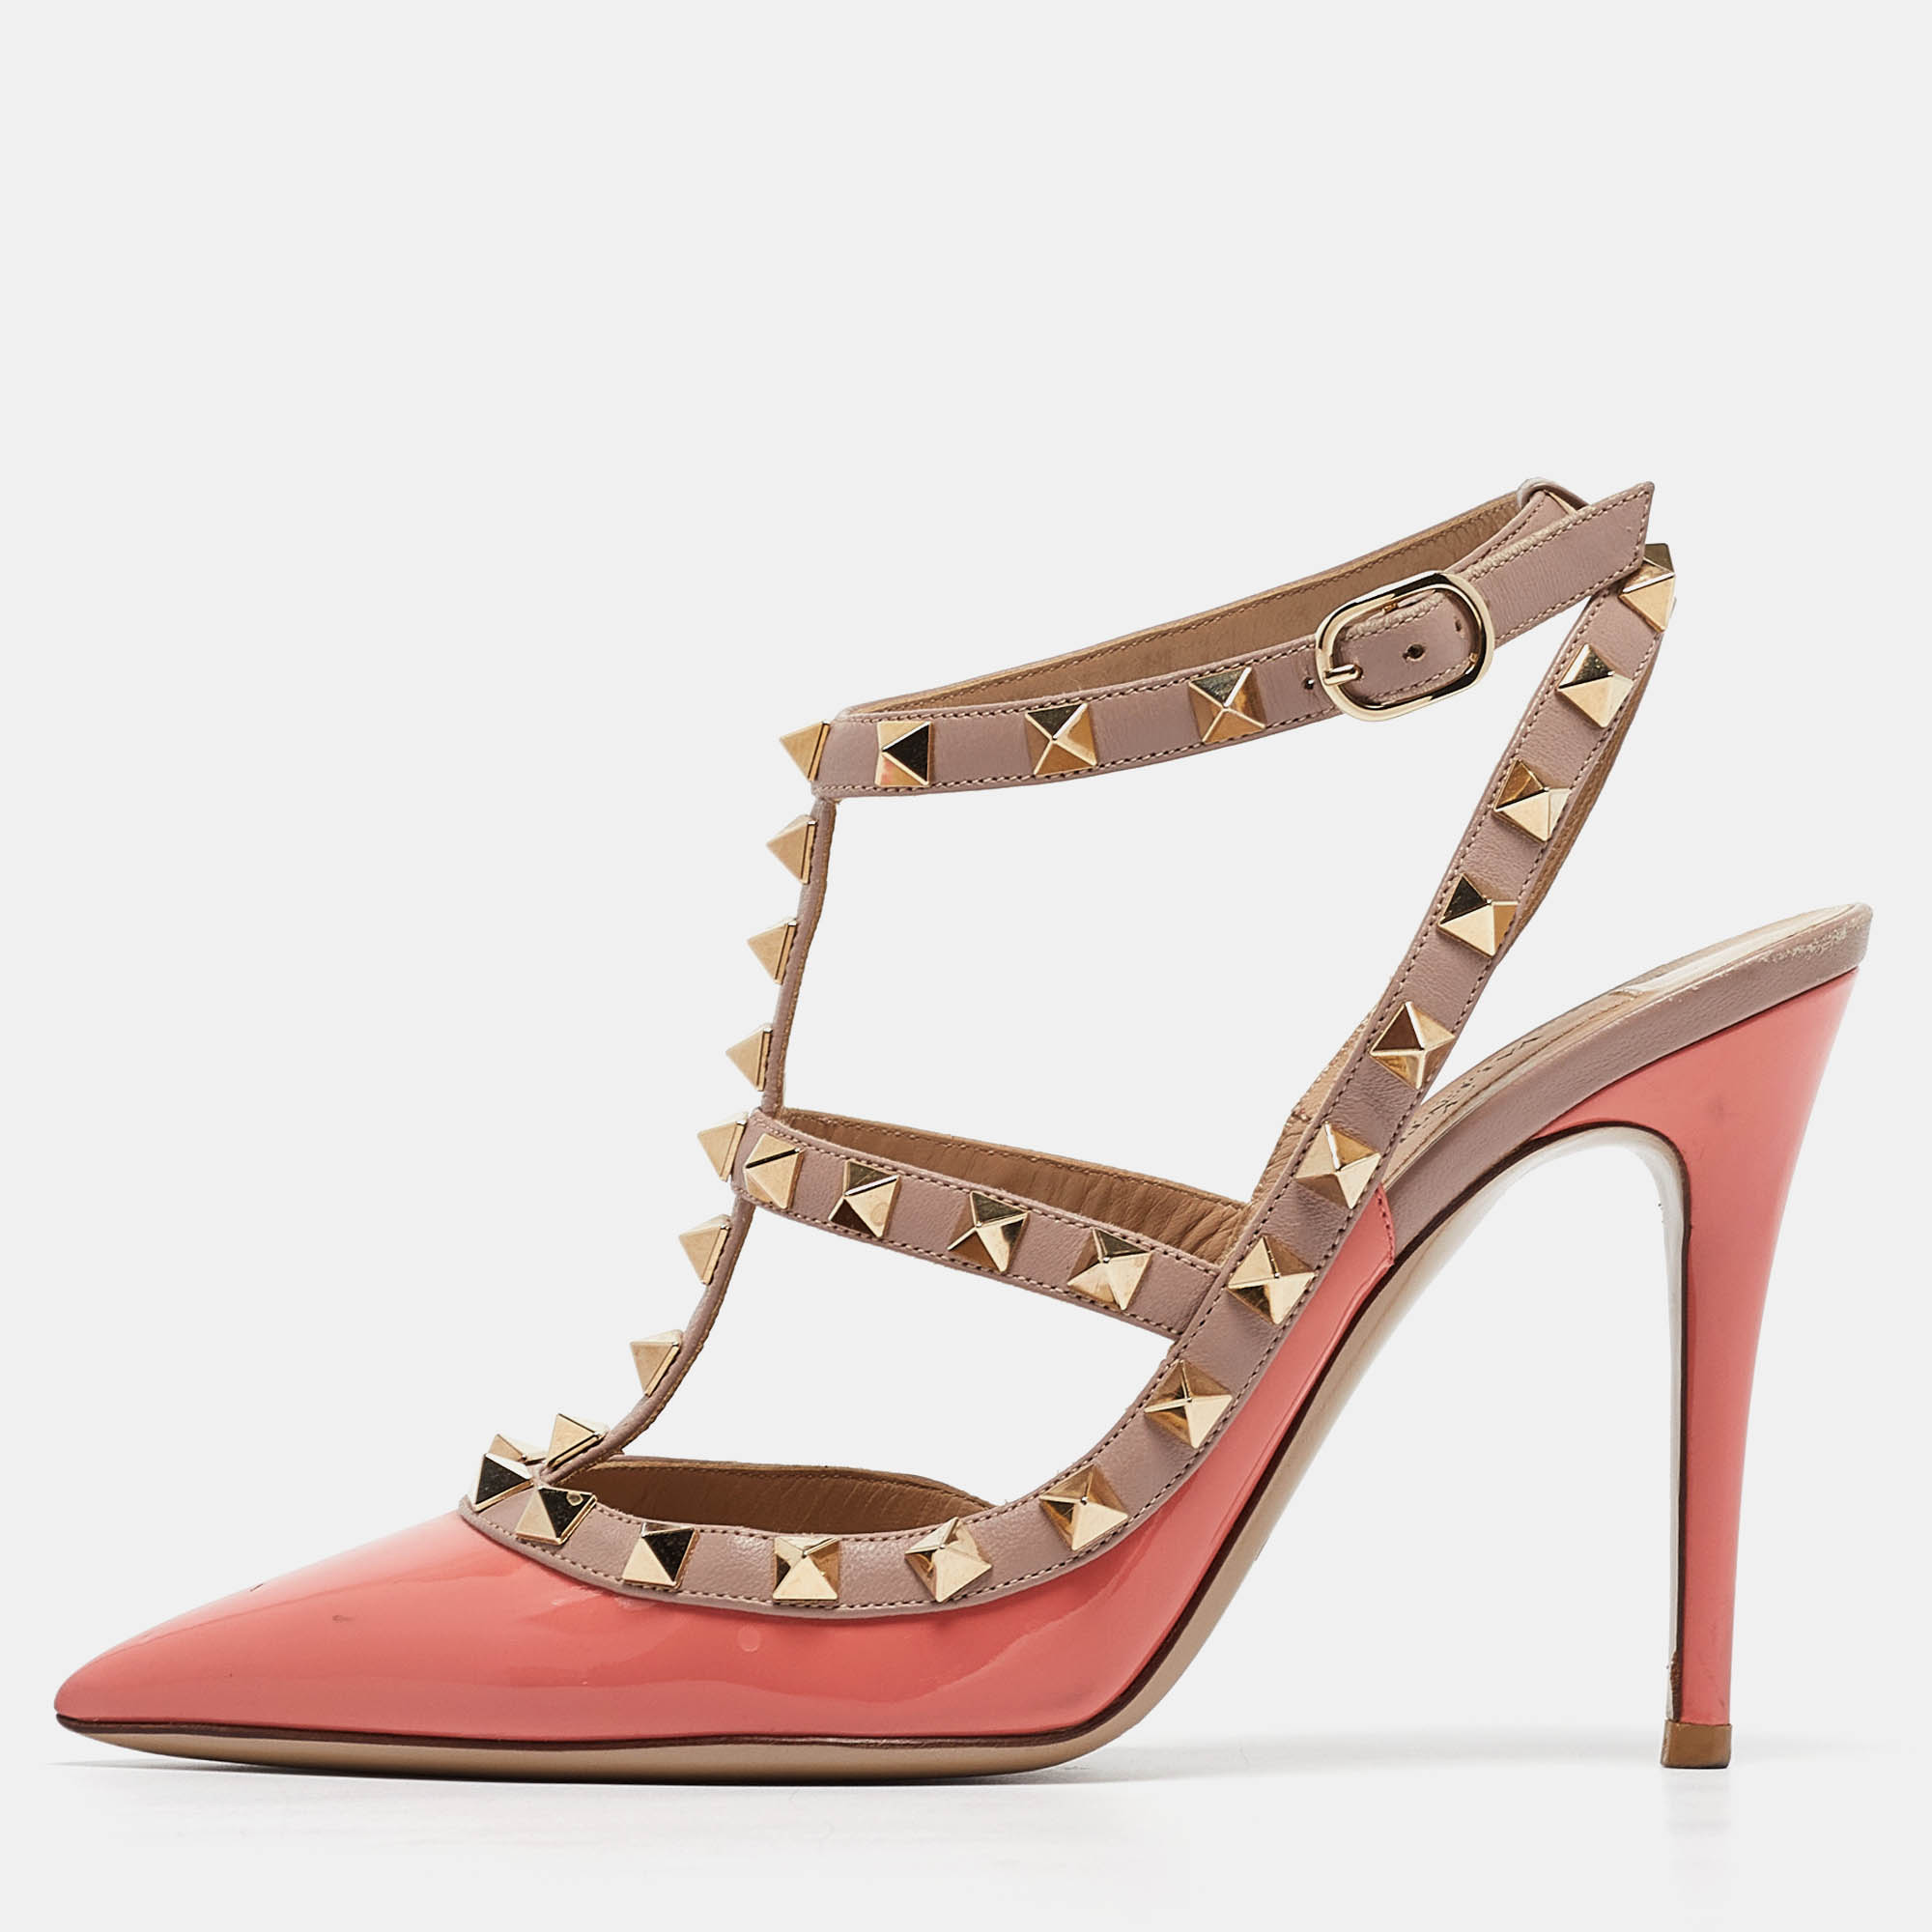 The addition of Rockstuds on the straps of these Valentino pumps leads to instant brand identification. Made from leather and patent leather they will elegantly frame your feet and flaunts pointed toes. The ankle buckle closure of these shoes will lend you the perfect fit and the 10.5cm heels will add an extra edge to your outfit.